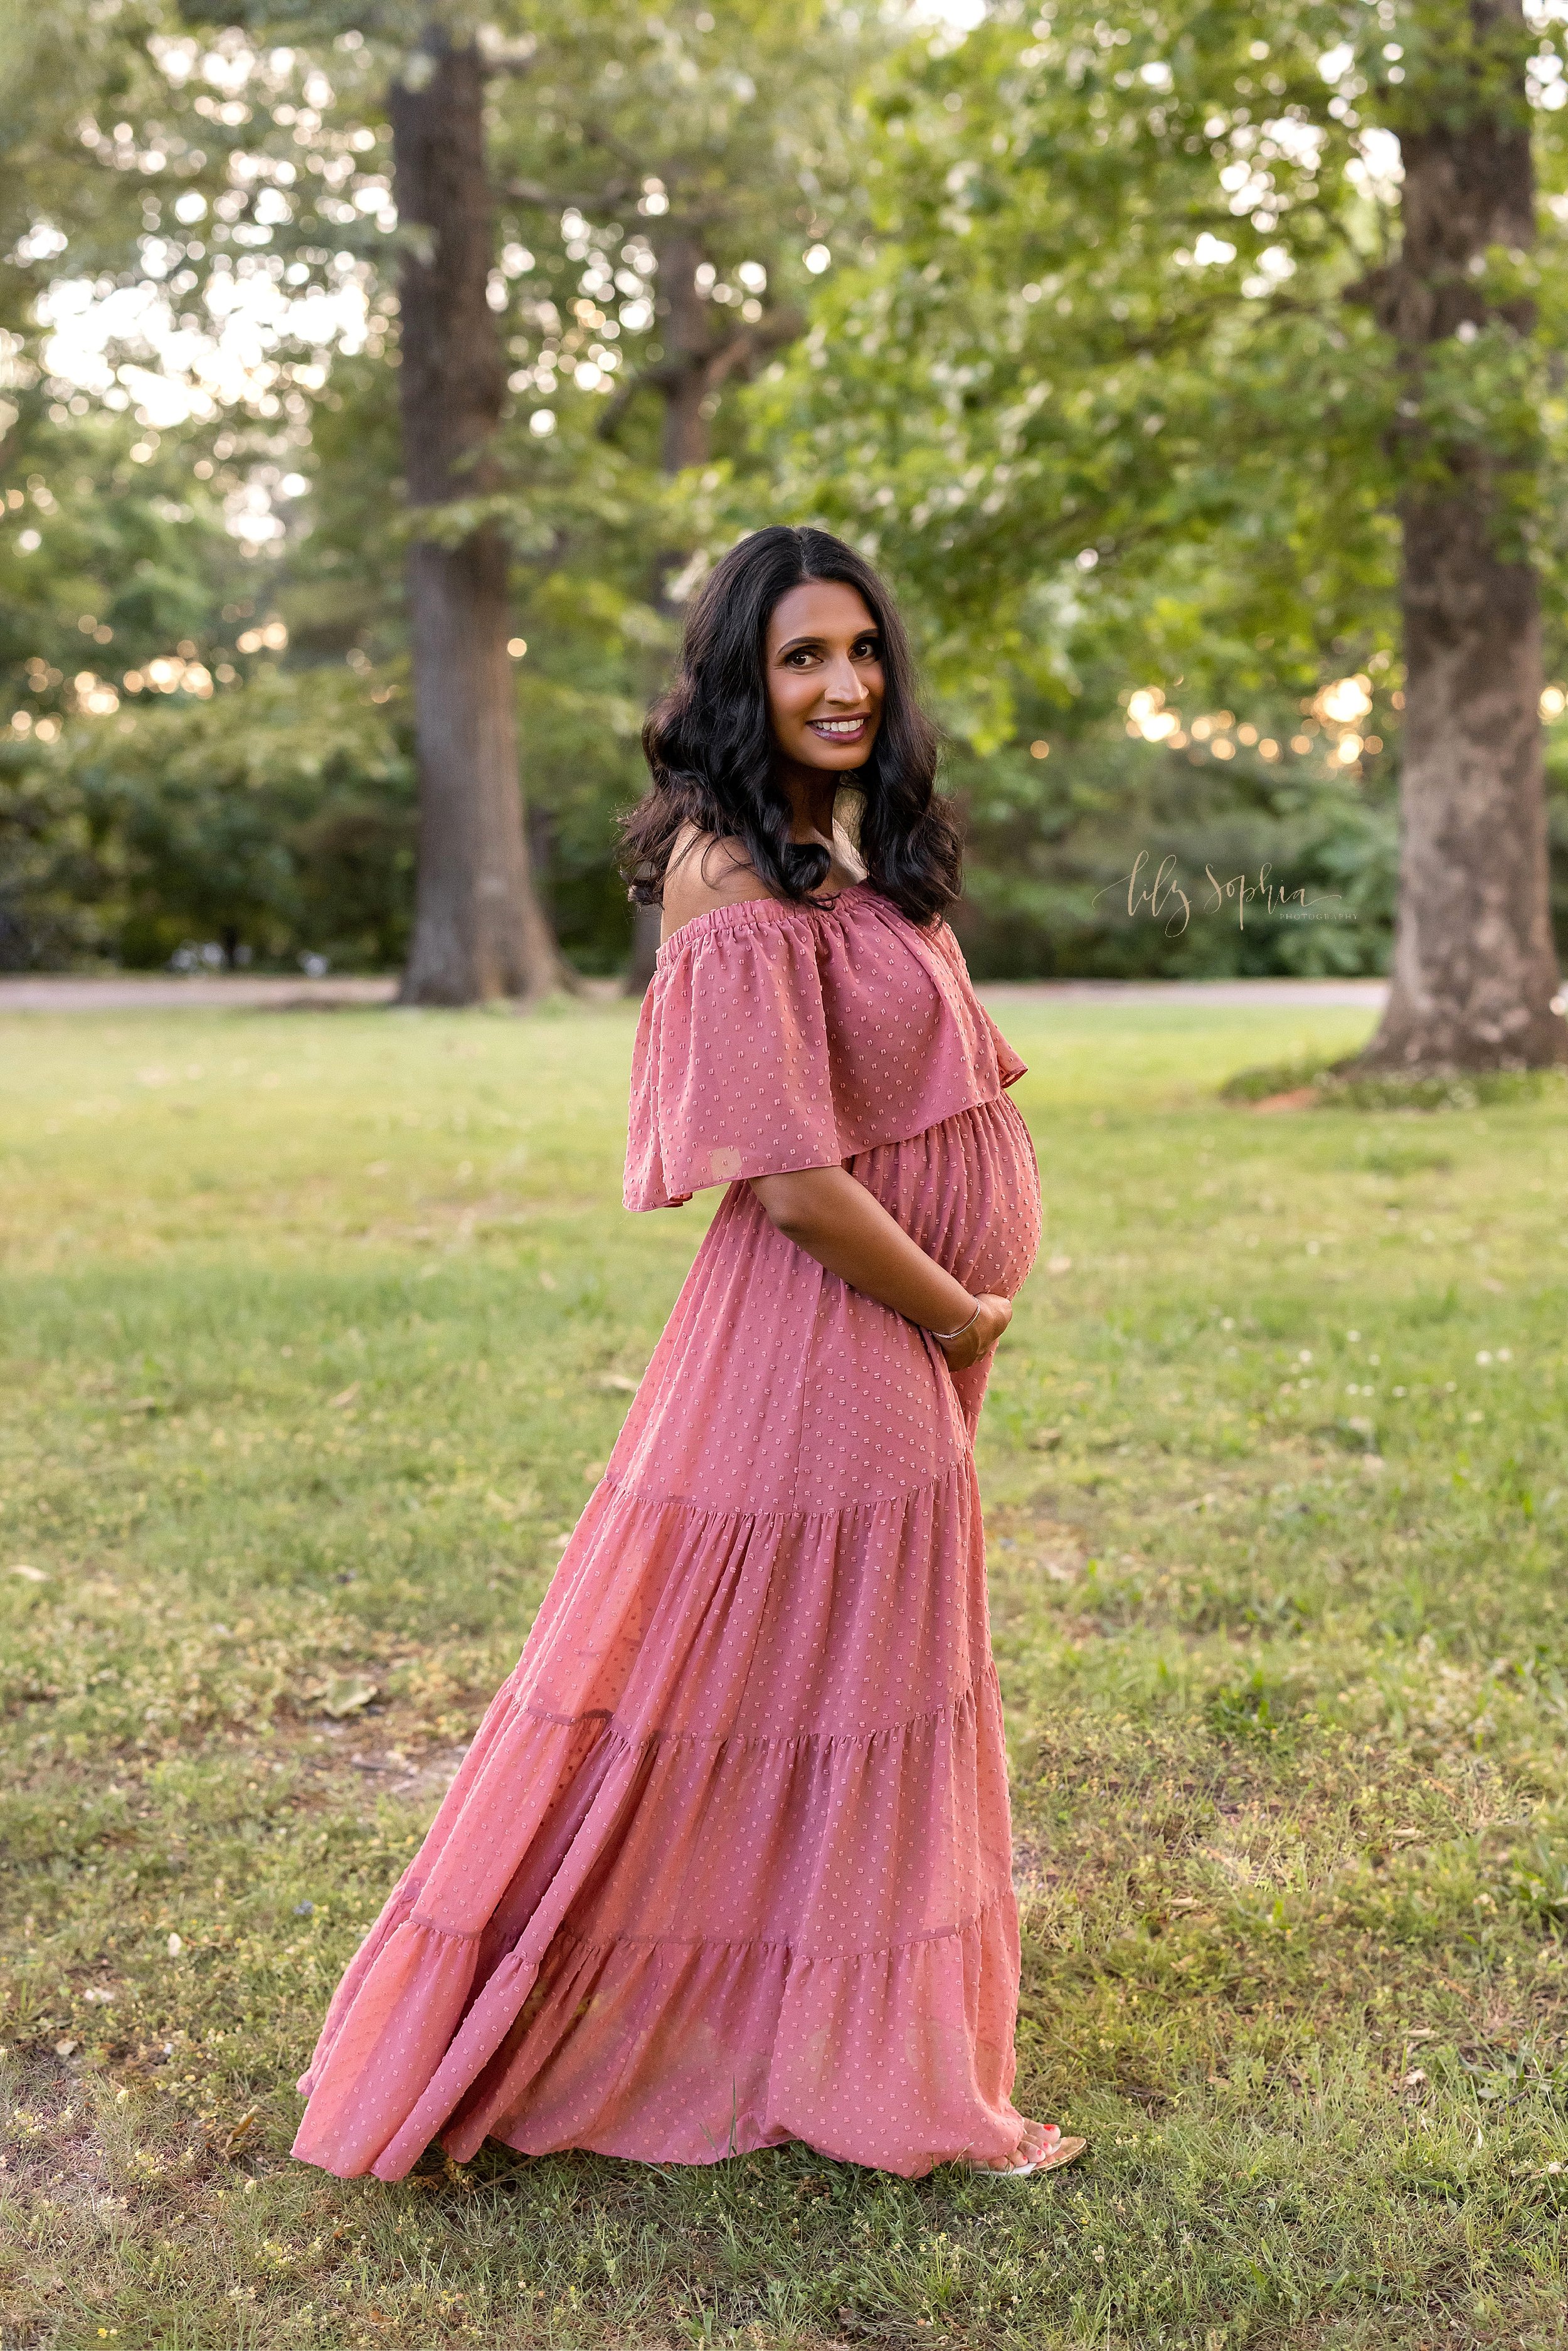  Maternity picture of an Indian mother wearing a flocked wide-bodiced off the shoulder ruffled full-length gown as she stands facing right holding her belly at sunset in an Atlanta park. 